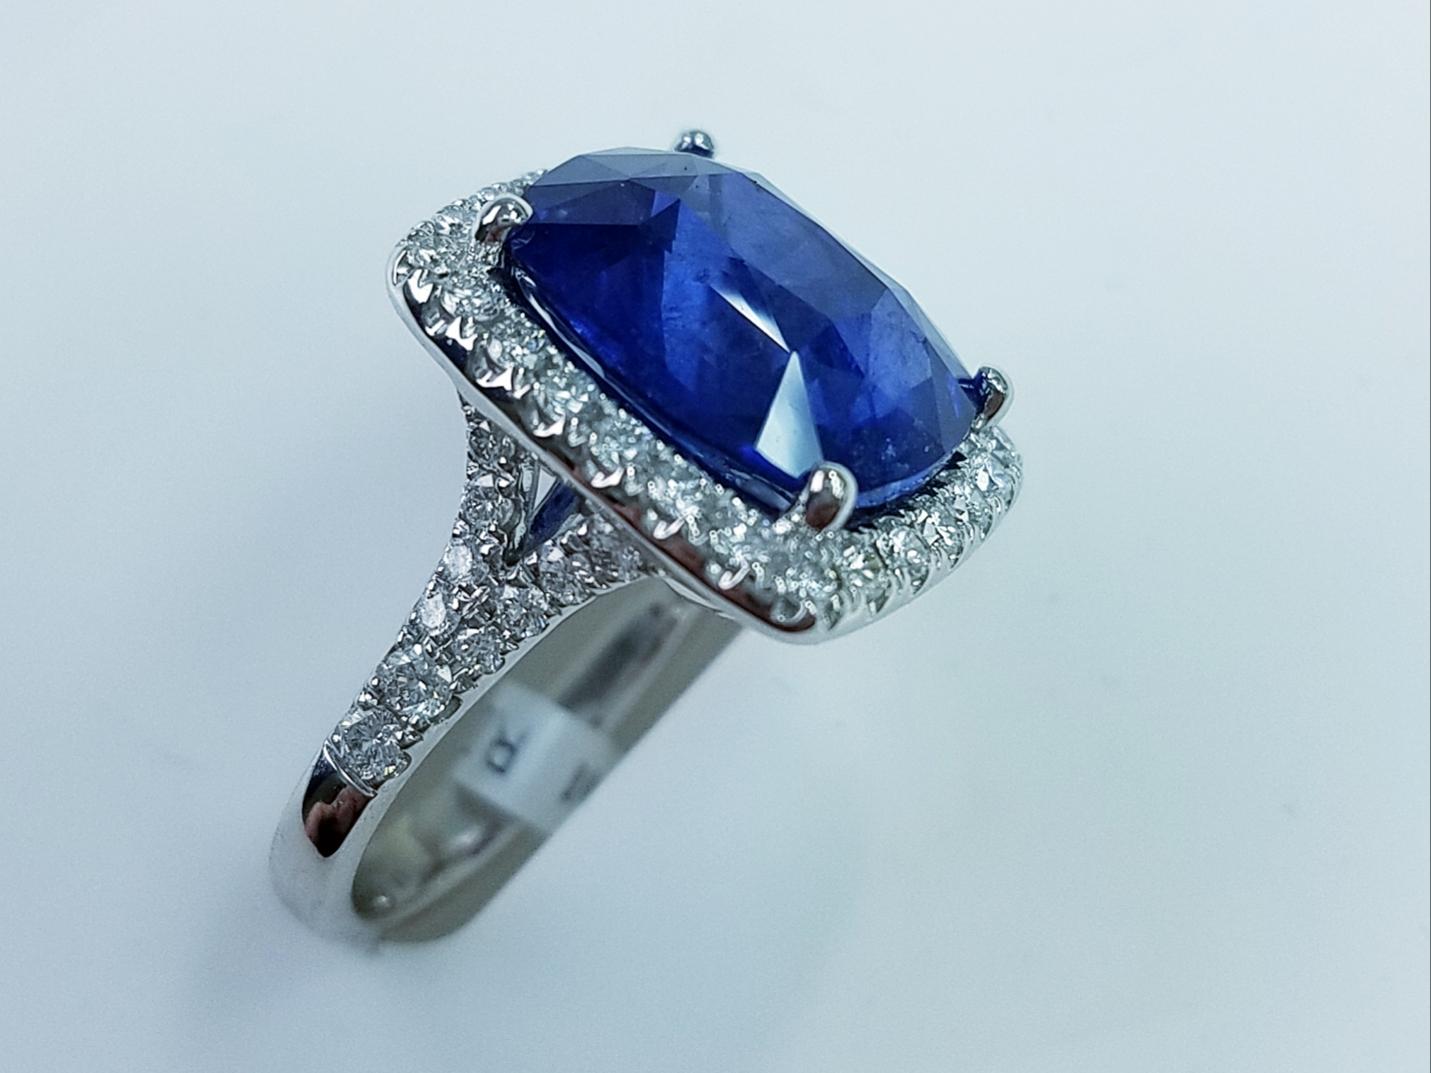 Platinum Cushion Cut Blue Sapphire and Diamond Ring
GIA CERTIFIED
11.06 Carats of Blue Sapphires 14X12MM  African
0.91 Carats of Diamonds
Cushion Cut
